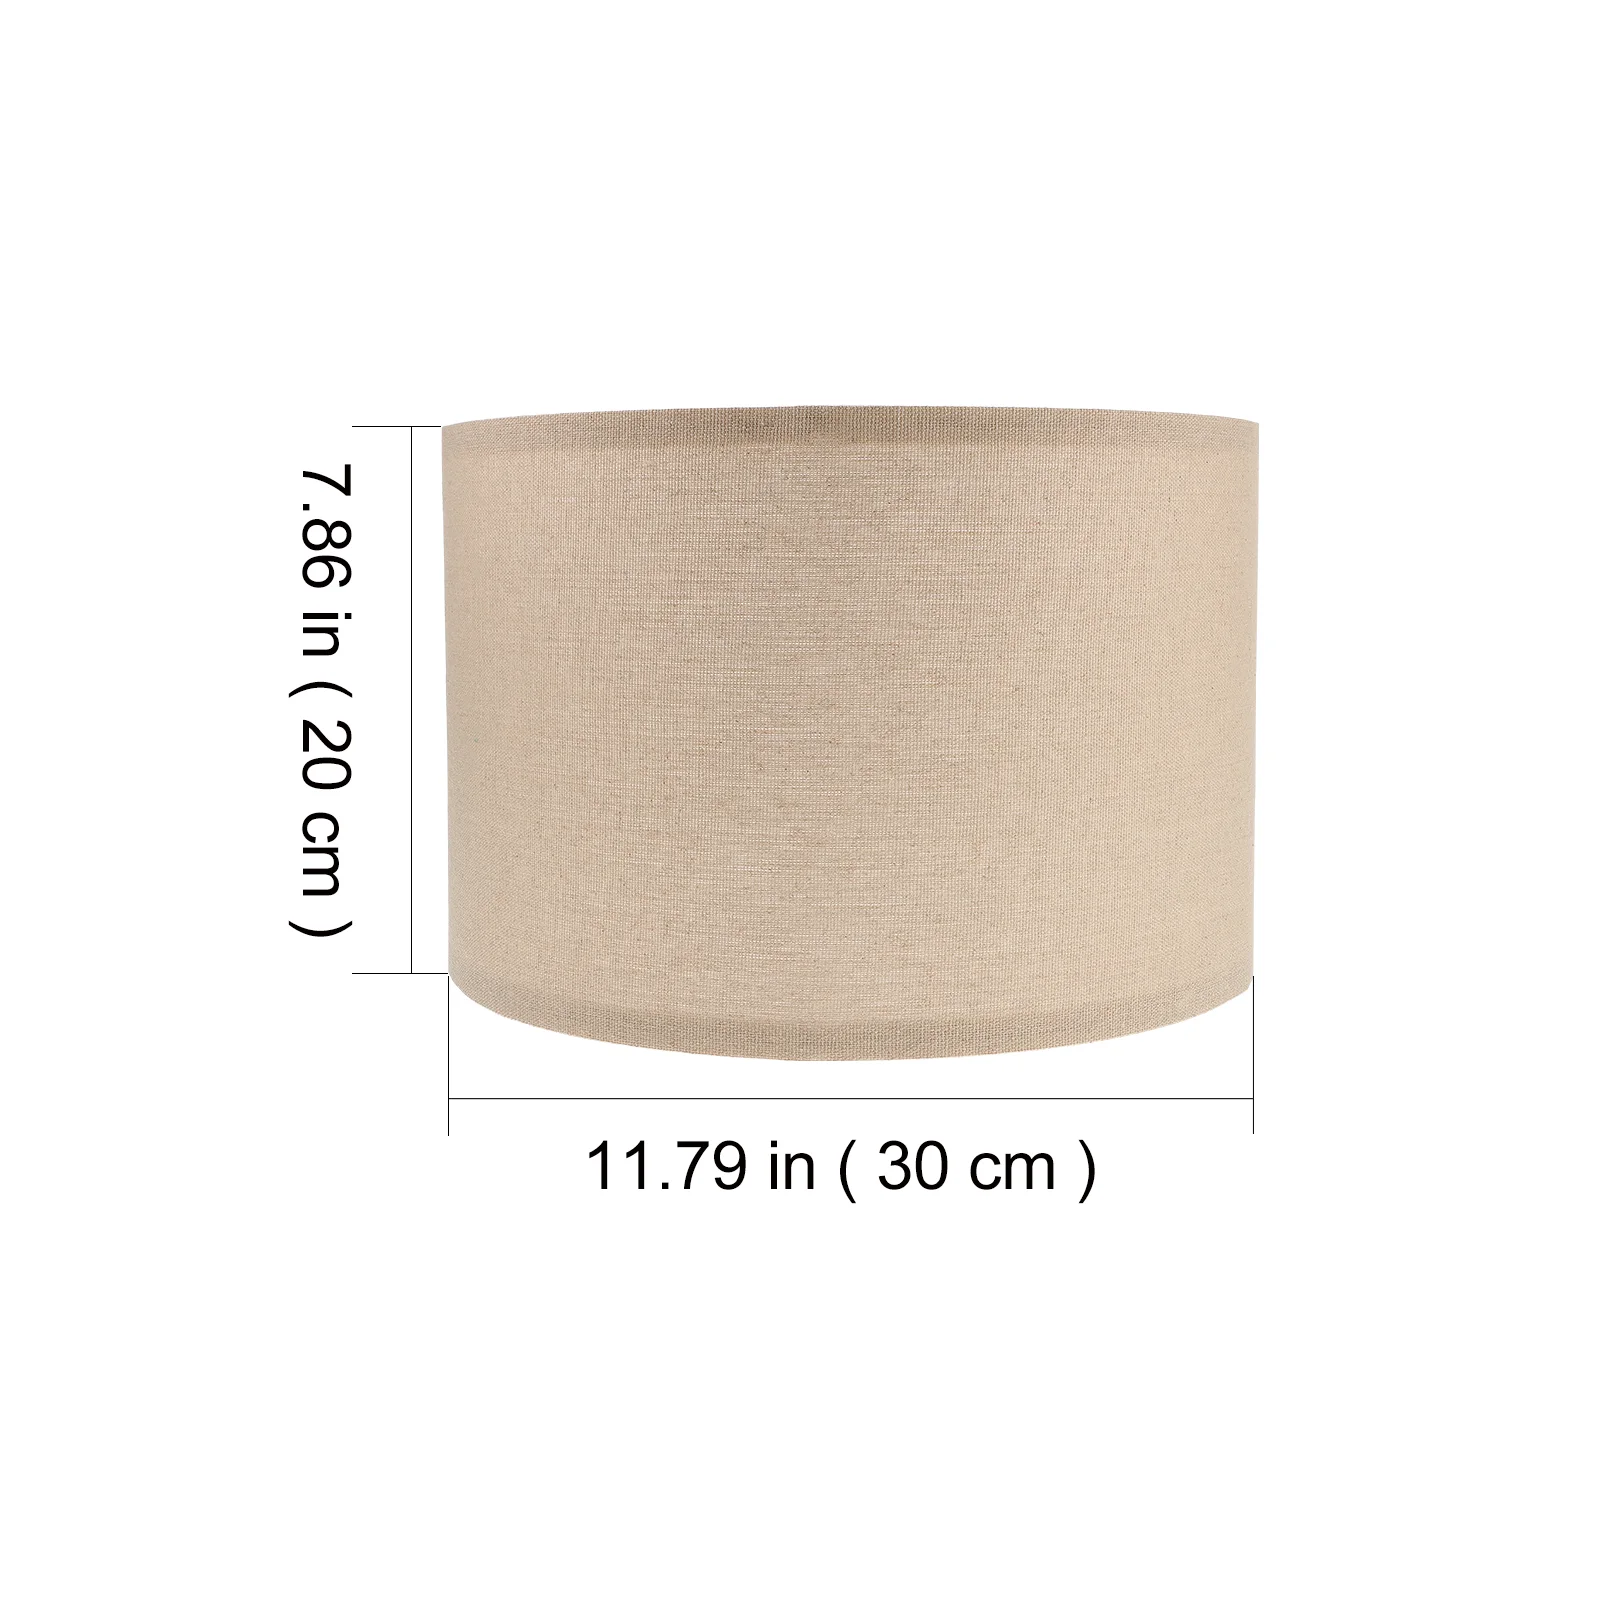 Lamp Lampshade Shade Shades Cover Drum Lampshades Light Table Wall Chandelier Ceiling Lamps Replacement Floor Cloth Retro Clip